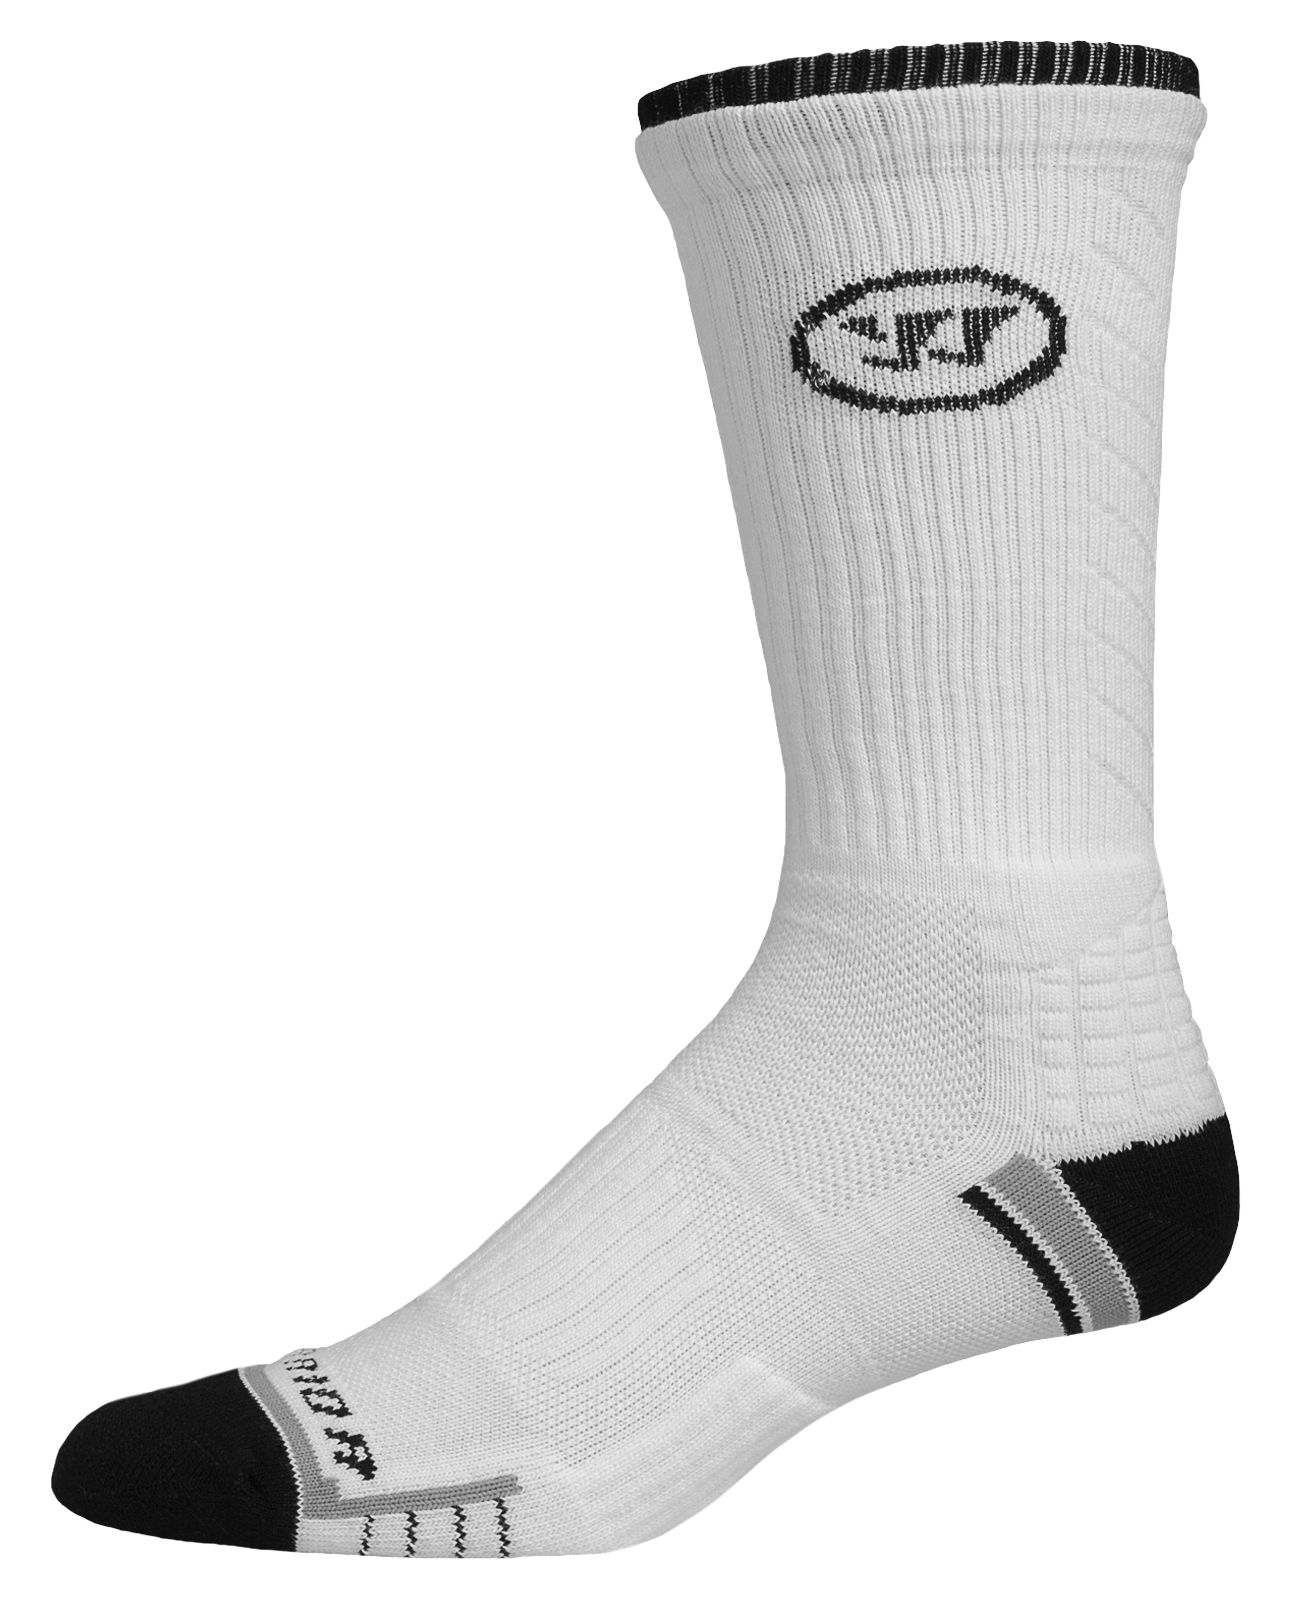 Warrior Crew Sock, White with Black image number 0